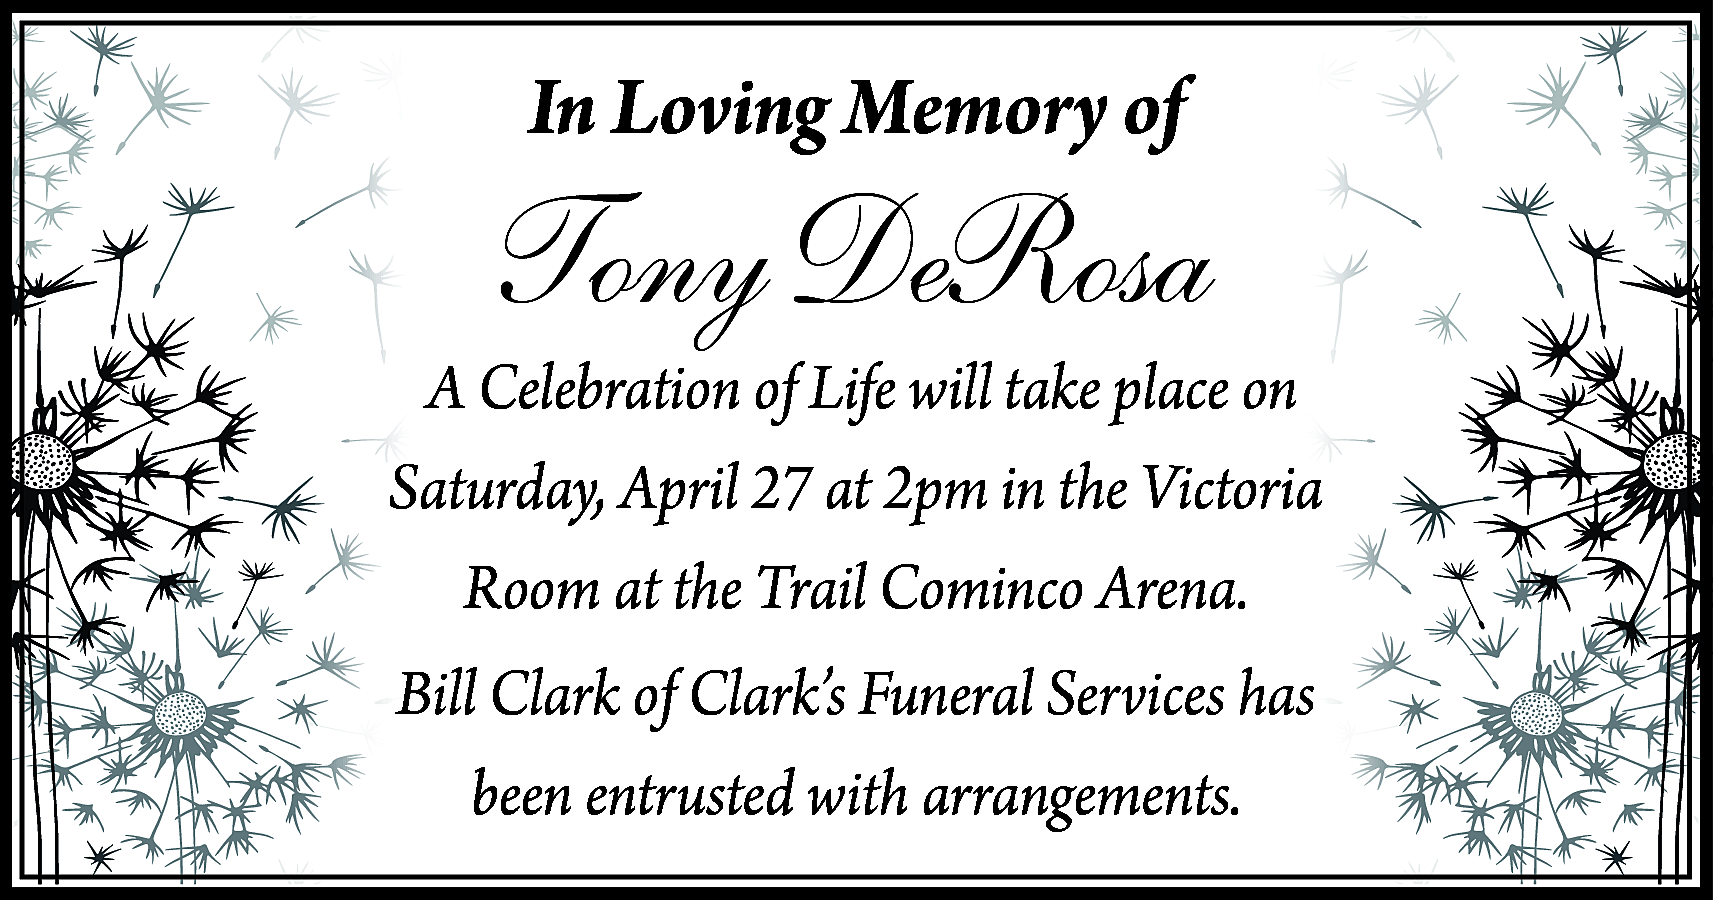 In Loving Memory of <br>  In Loving Memory of    Tony DeRosa    A Celebration of Life will take place on  Saturday, April 27 at 2pm in the Victoria  Room at the Trail Cominco Arena.  Bill Clark of Clark’s Funeral Services has  been entrusted with arrangements.    